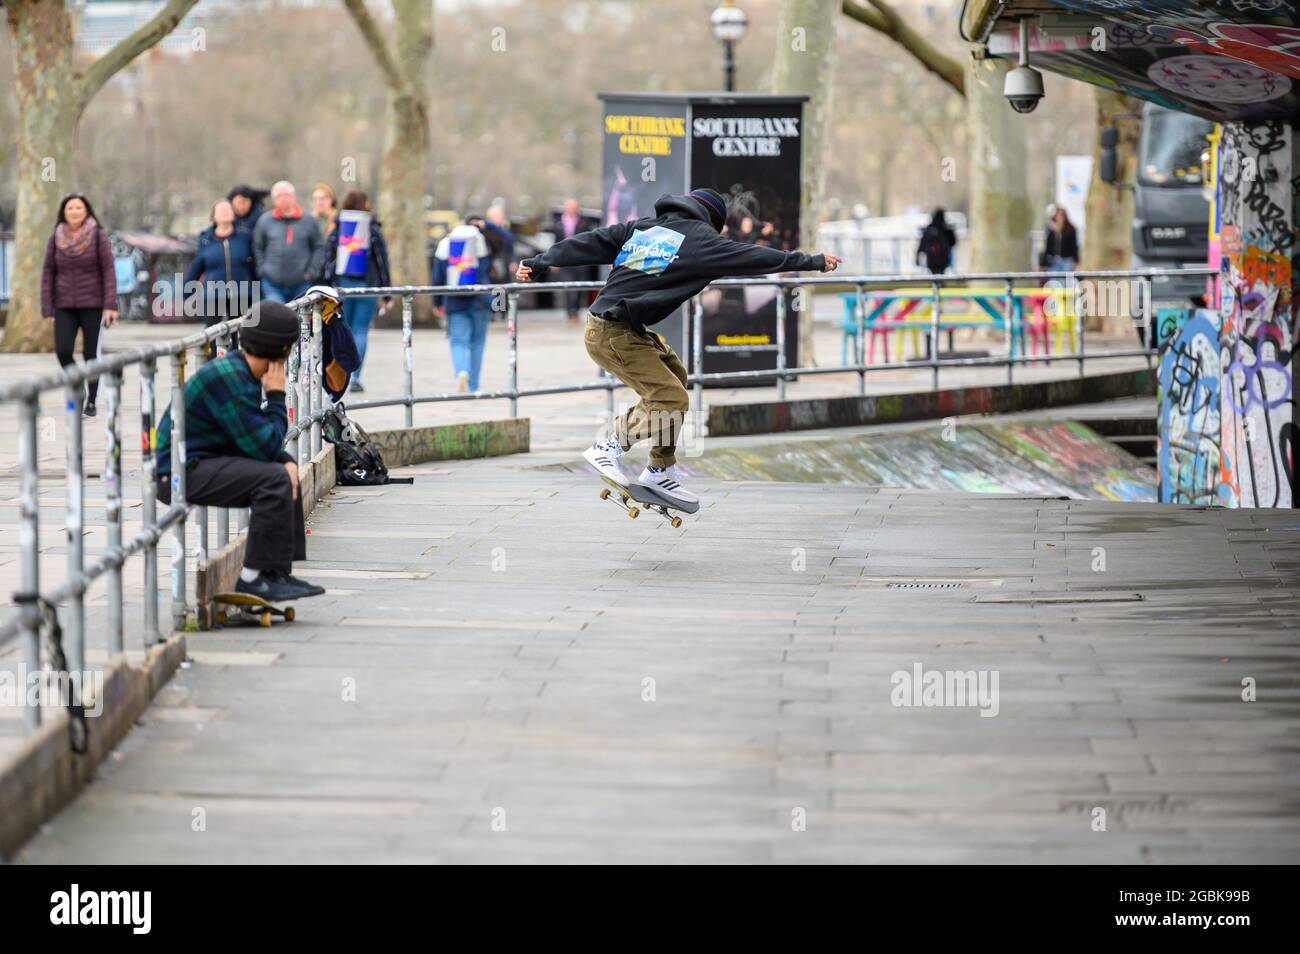 LONDON - MARCH 10, 2020: Young Skateboarder practising his moves with a friend at skate centre on London's South Bank Stock Photo